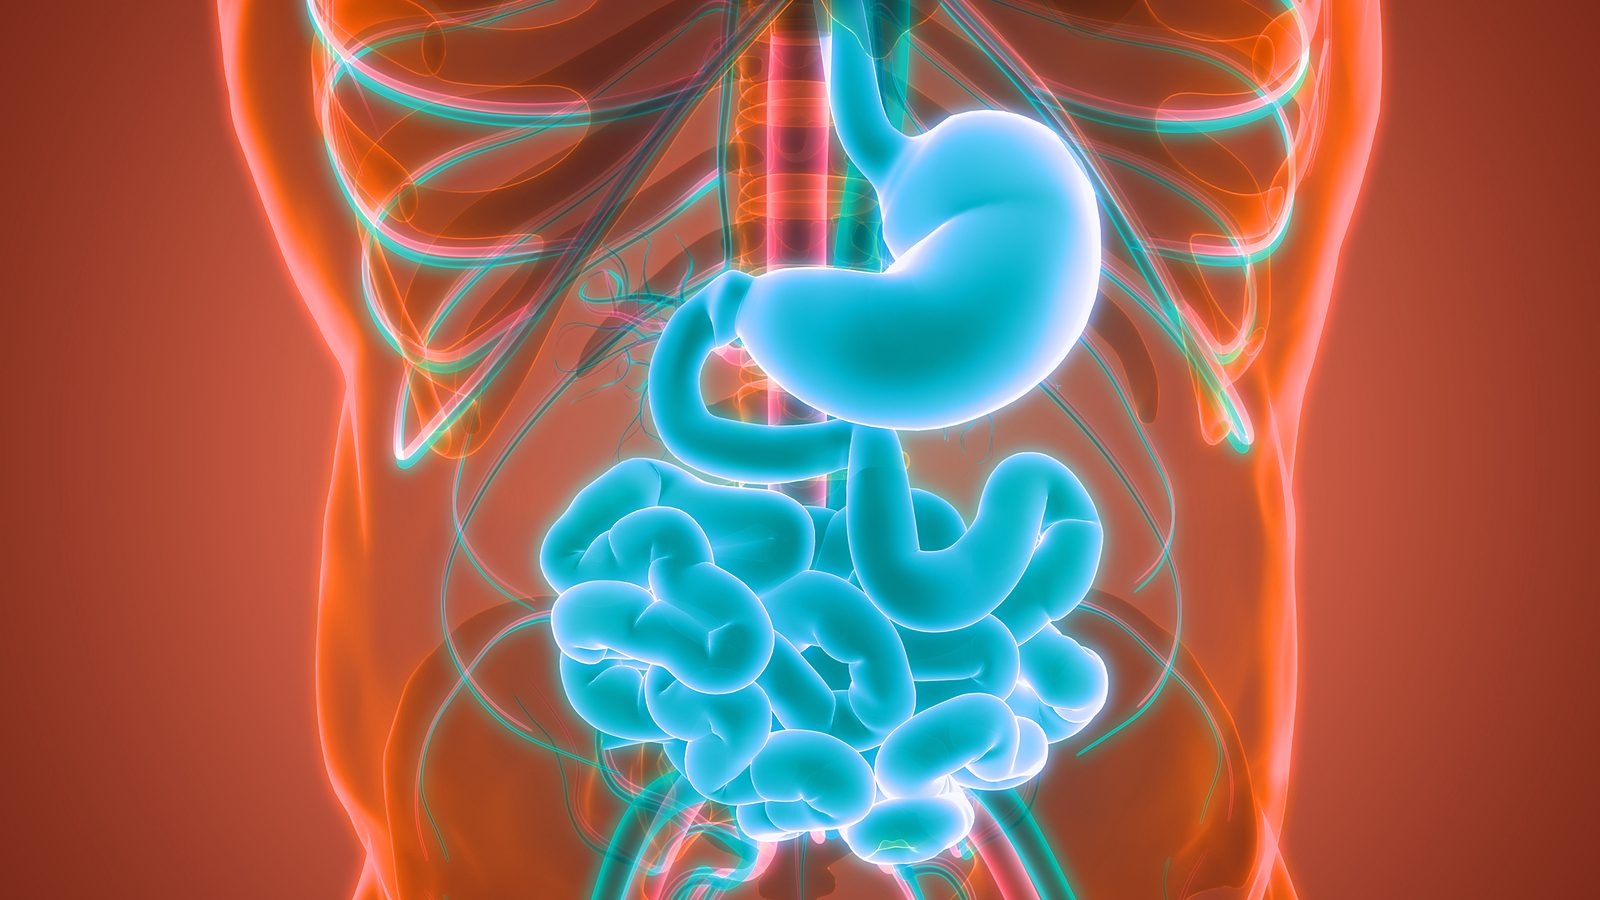 3d Illustration Concept Of Human Digestive System Stomach With S